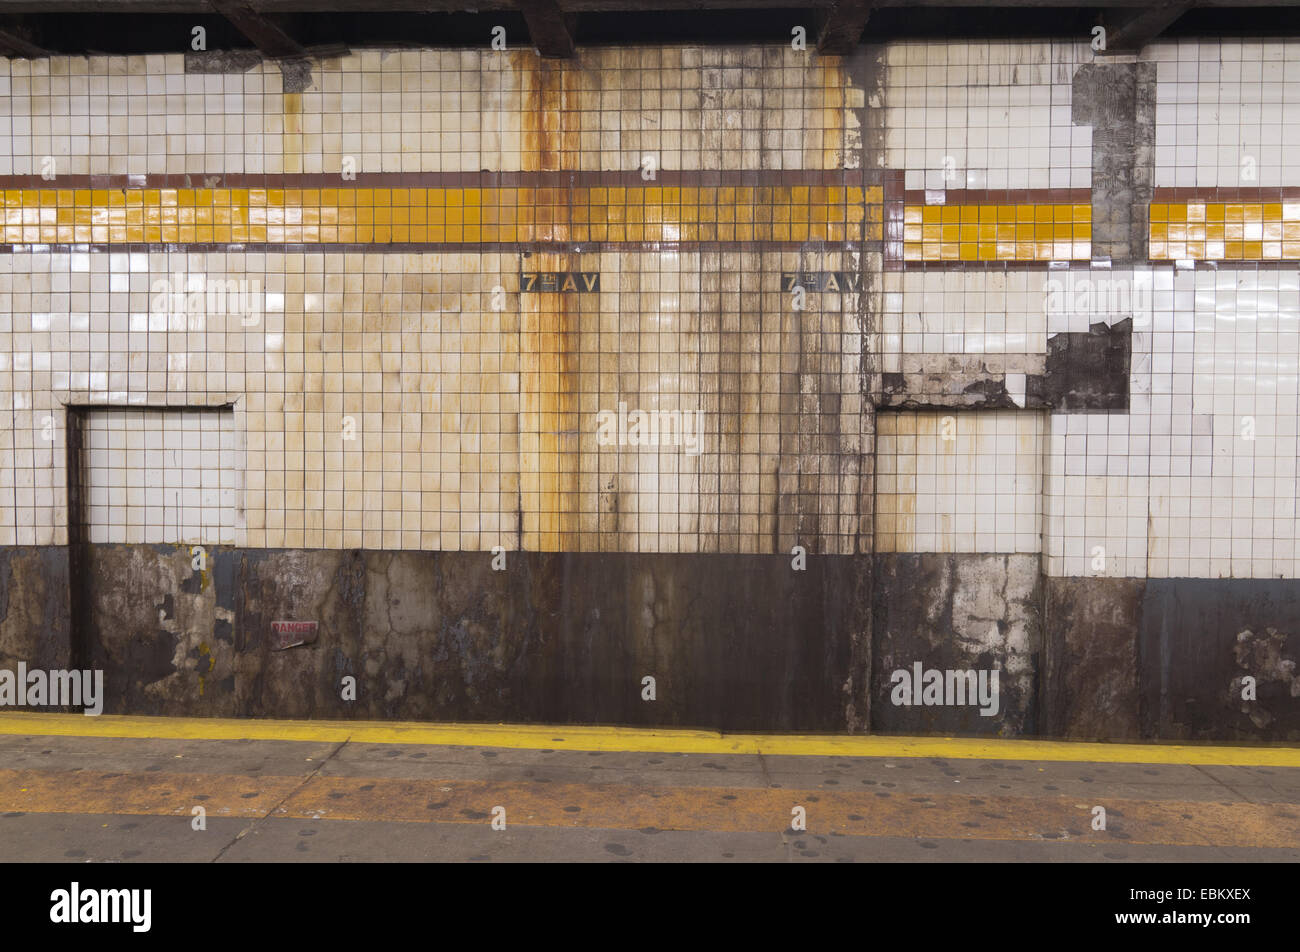 Crumbling infrastructure, interior of 7th avenue subway station Brooklyn, New York City, USA Stock Photo